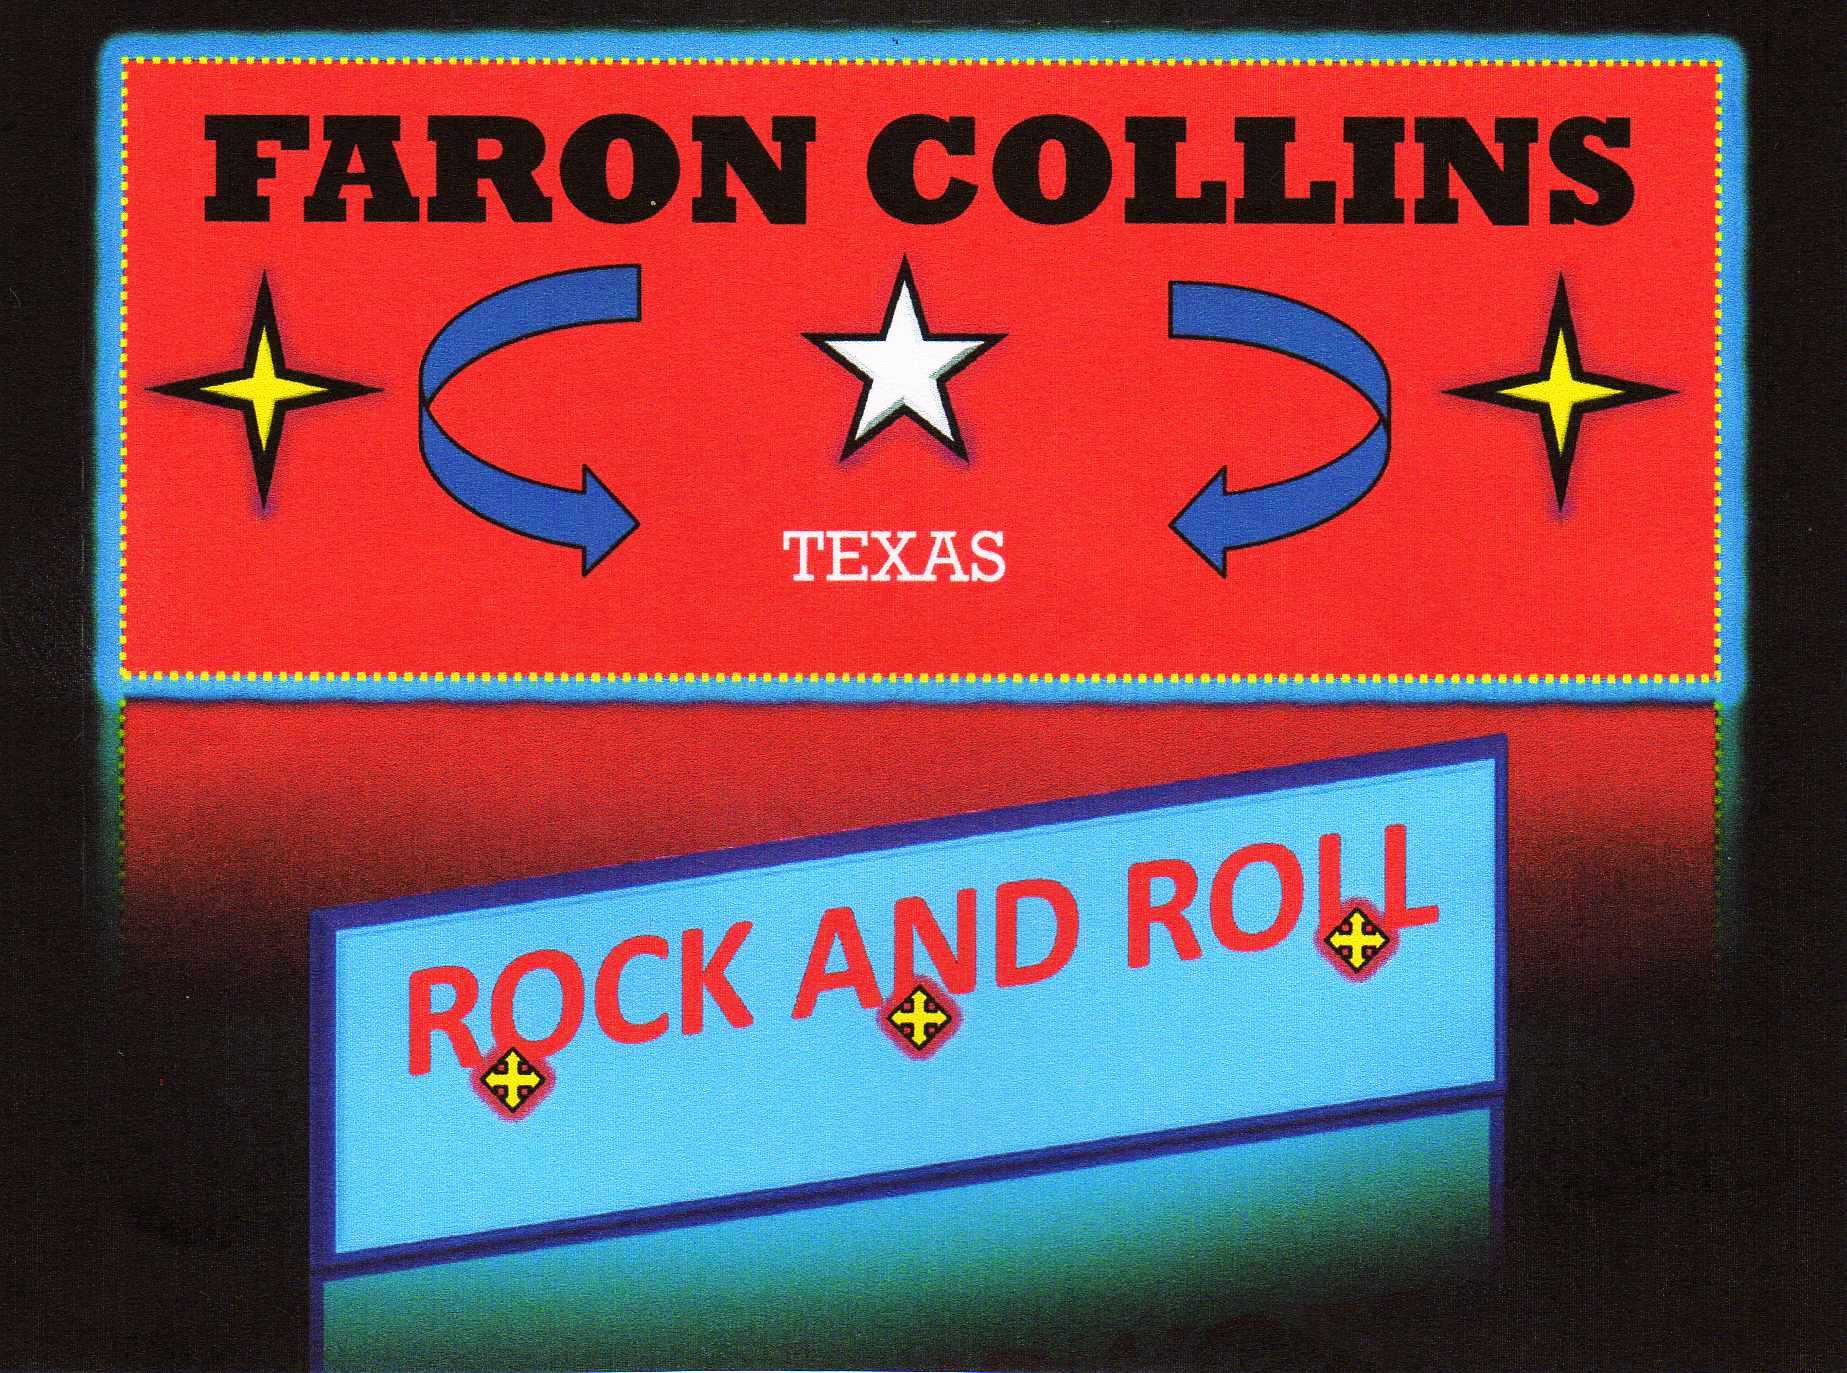 Texas Rock And Roll Banner for Faron Collins